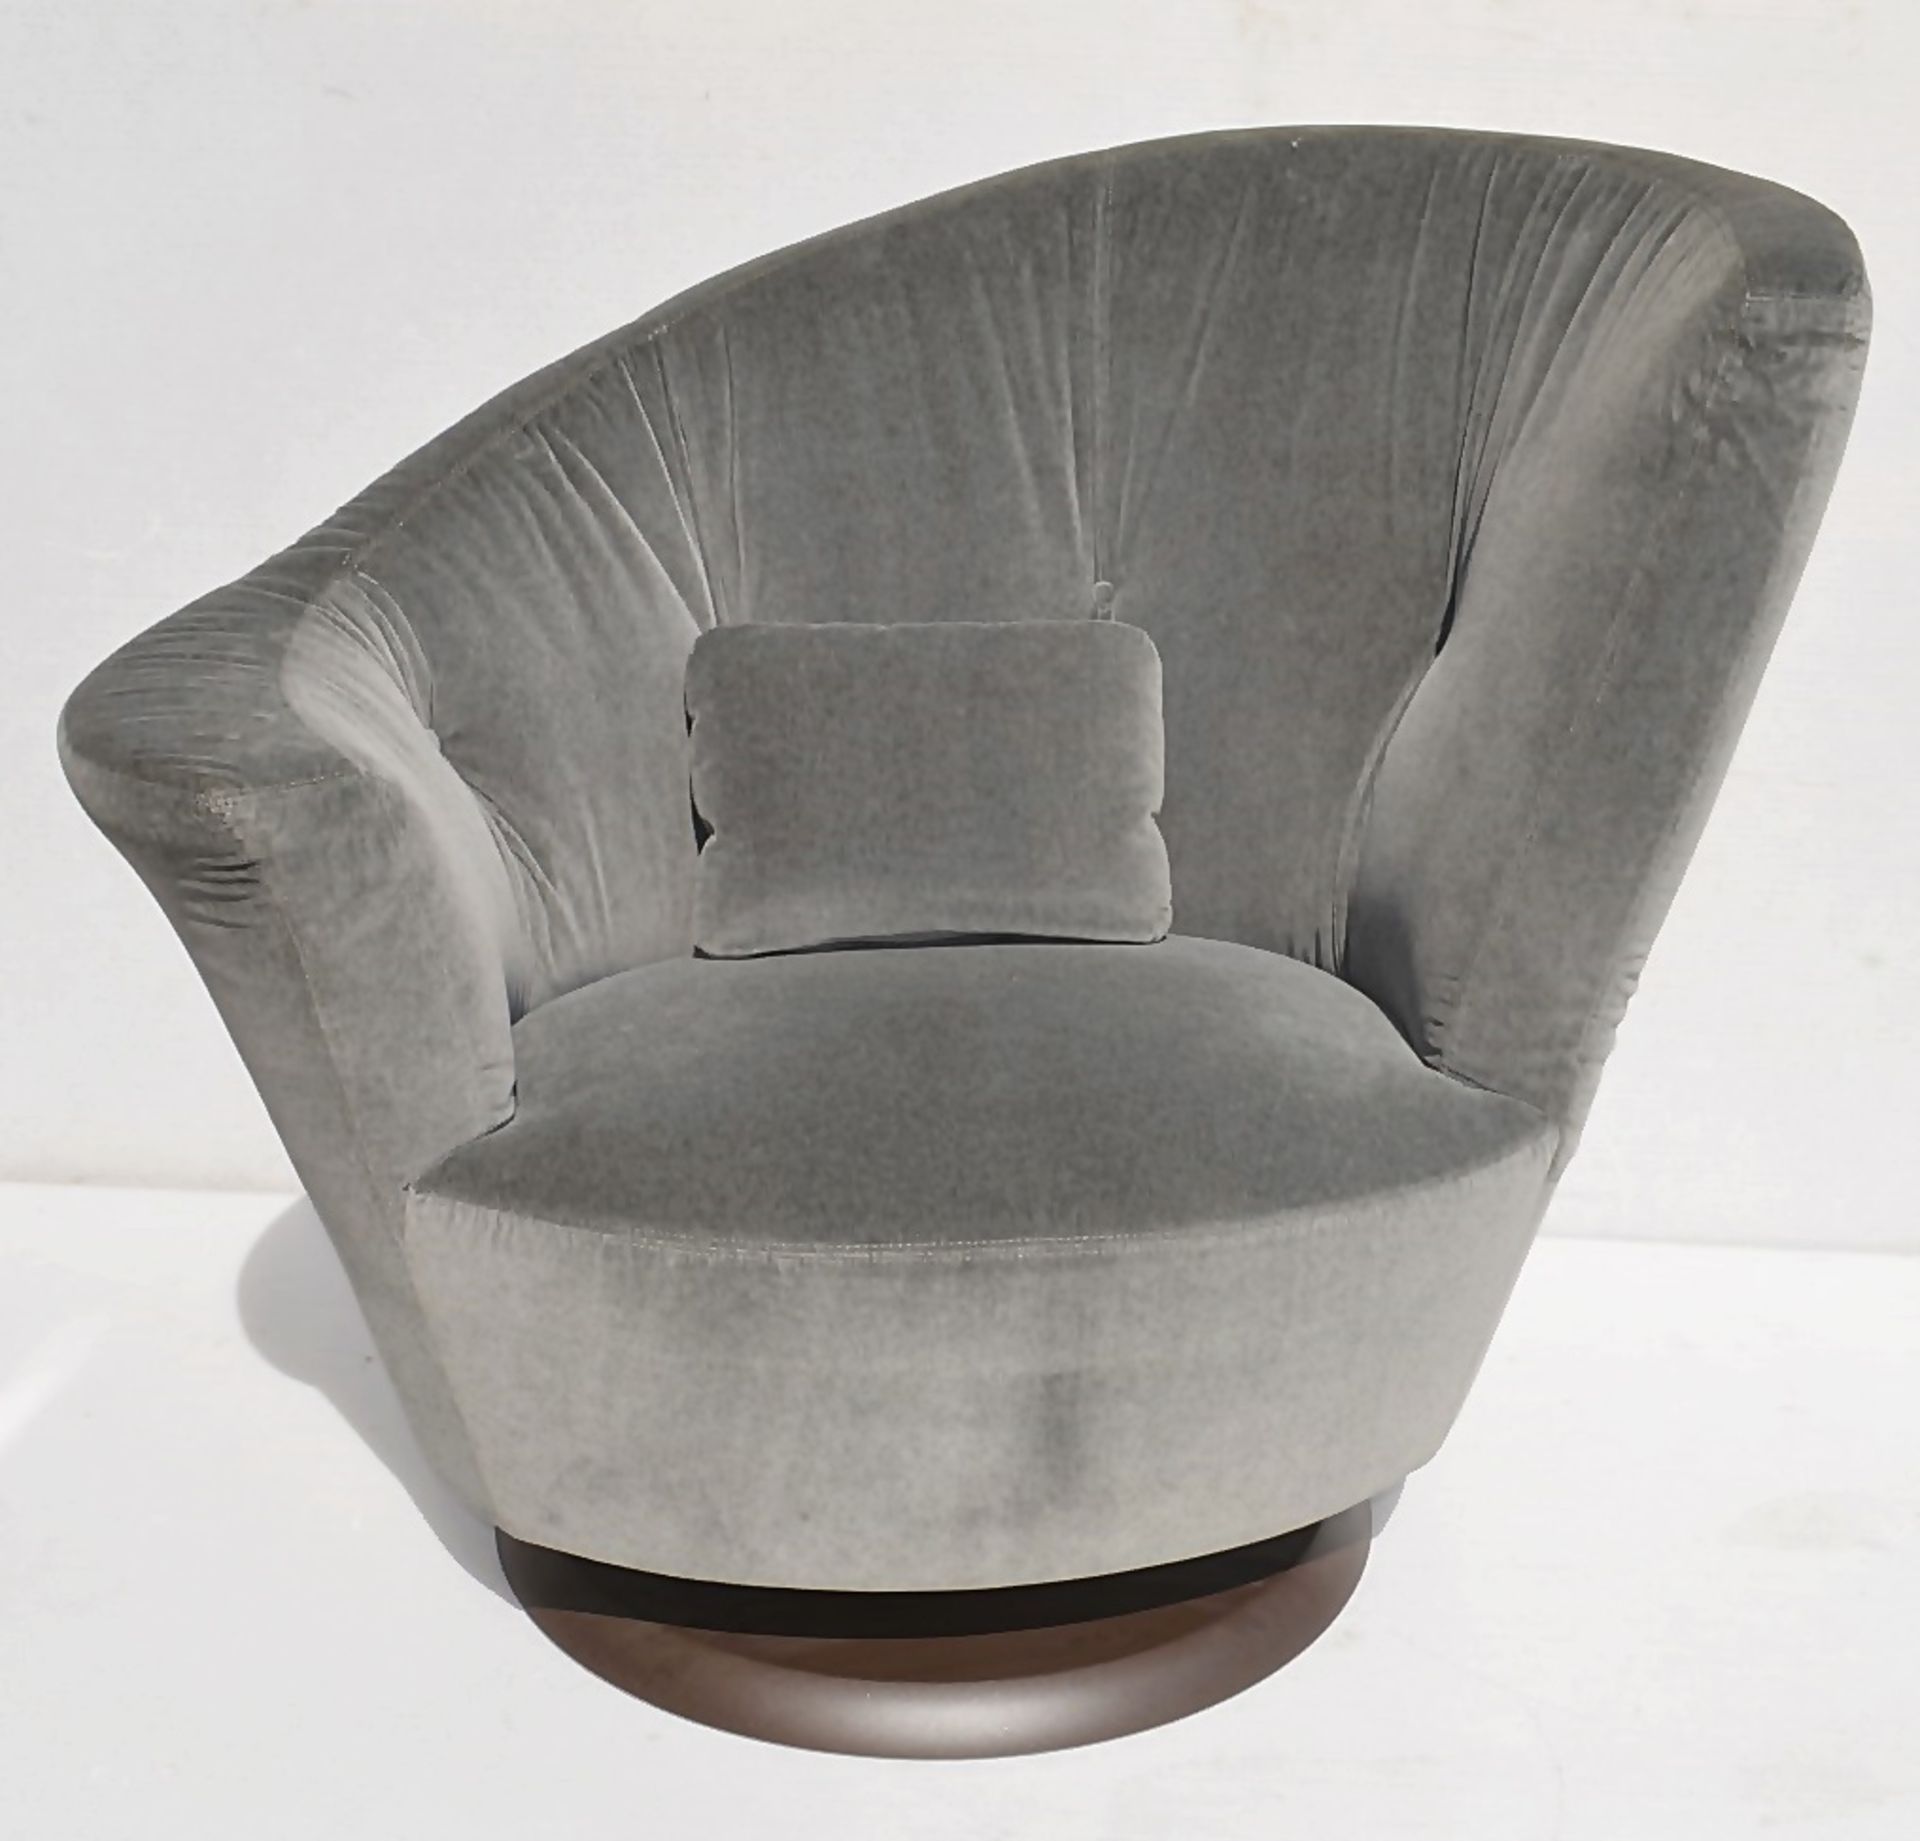 1 x GIORGETTI 'Arabella' Large Luxury Swivel Velvet Upholstered Armchair With Cushion - RRP £1,739